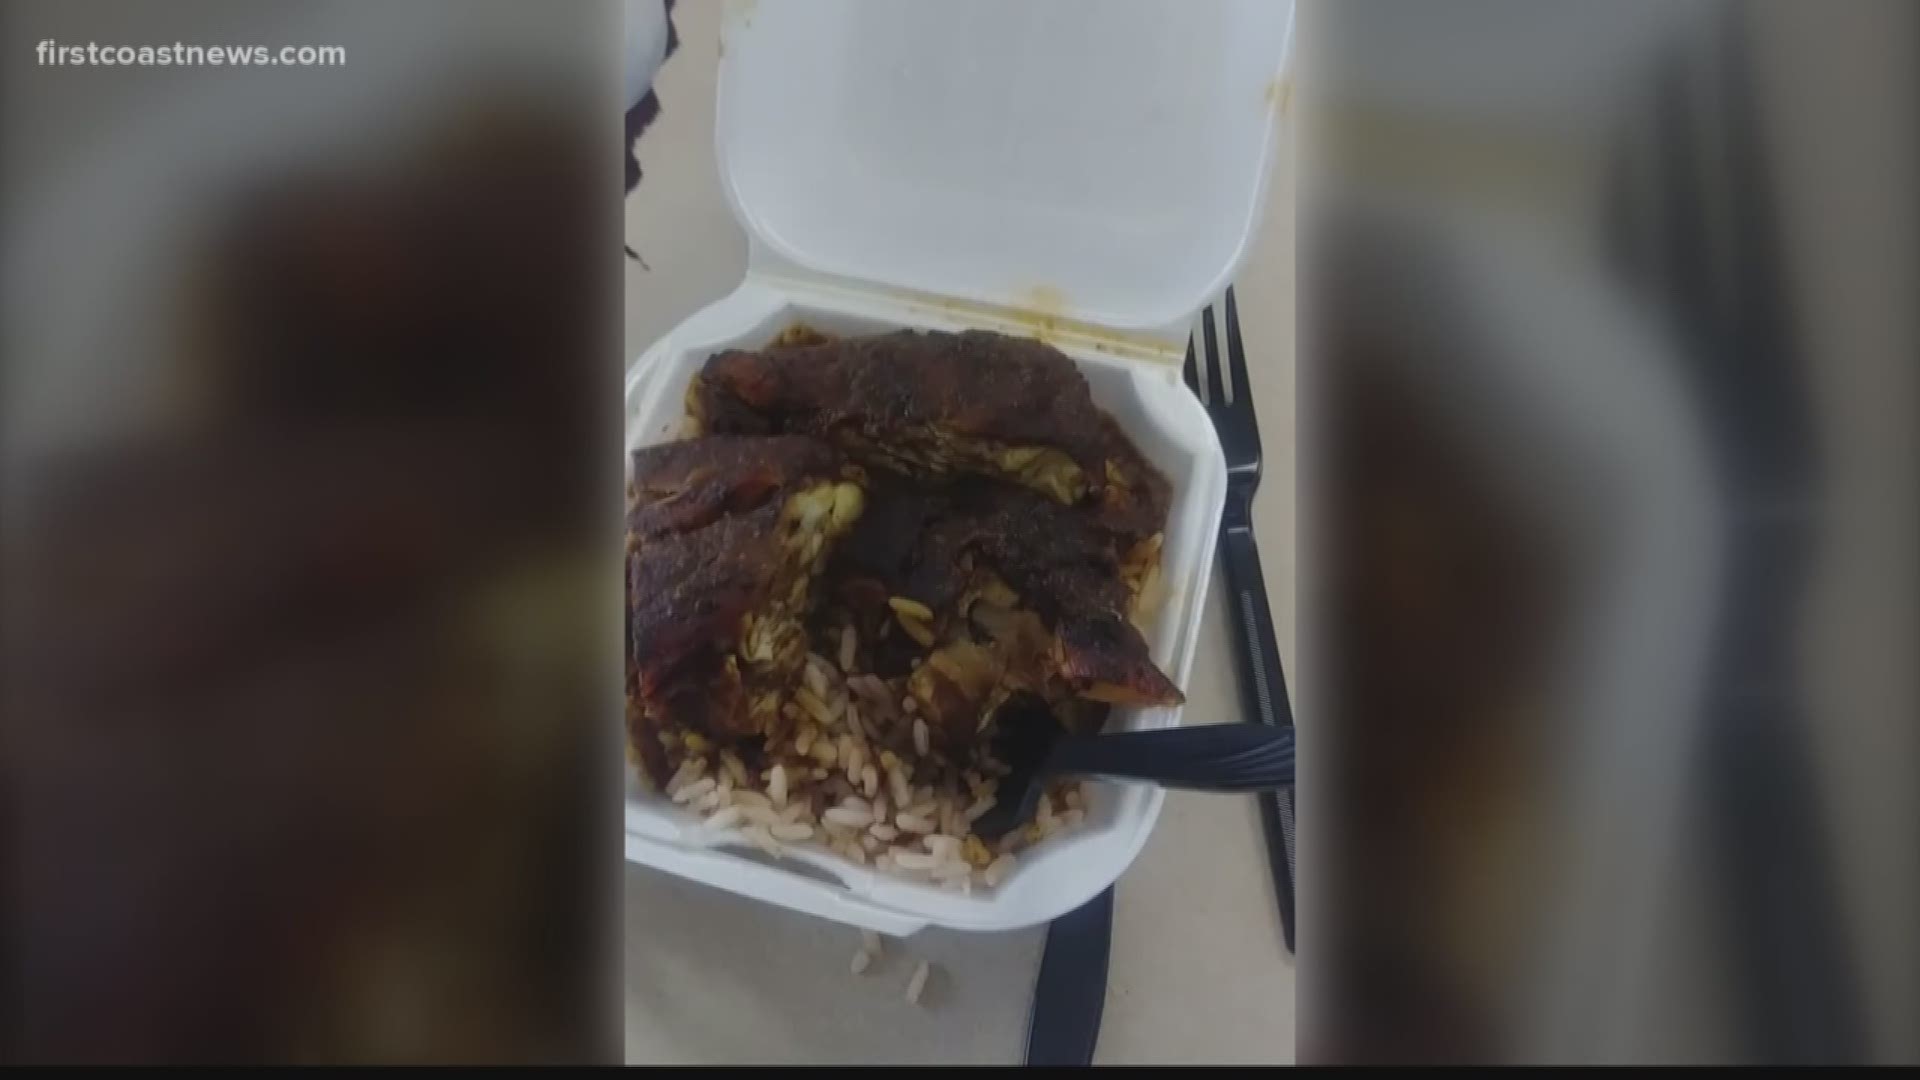 A woman got a to-go order from Caribbean Sunrise Bakery on Main St. near Downtown Jacksonville. When she arrived back at work with her order, she found maggots in her chicken.